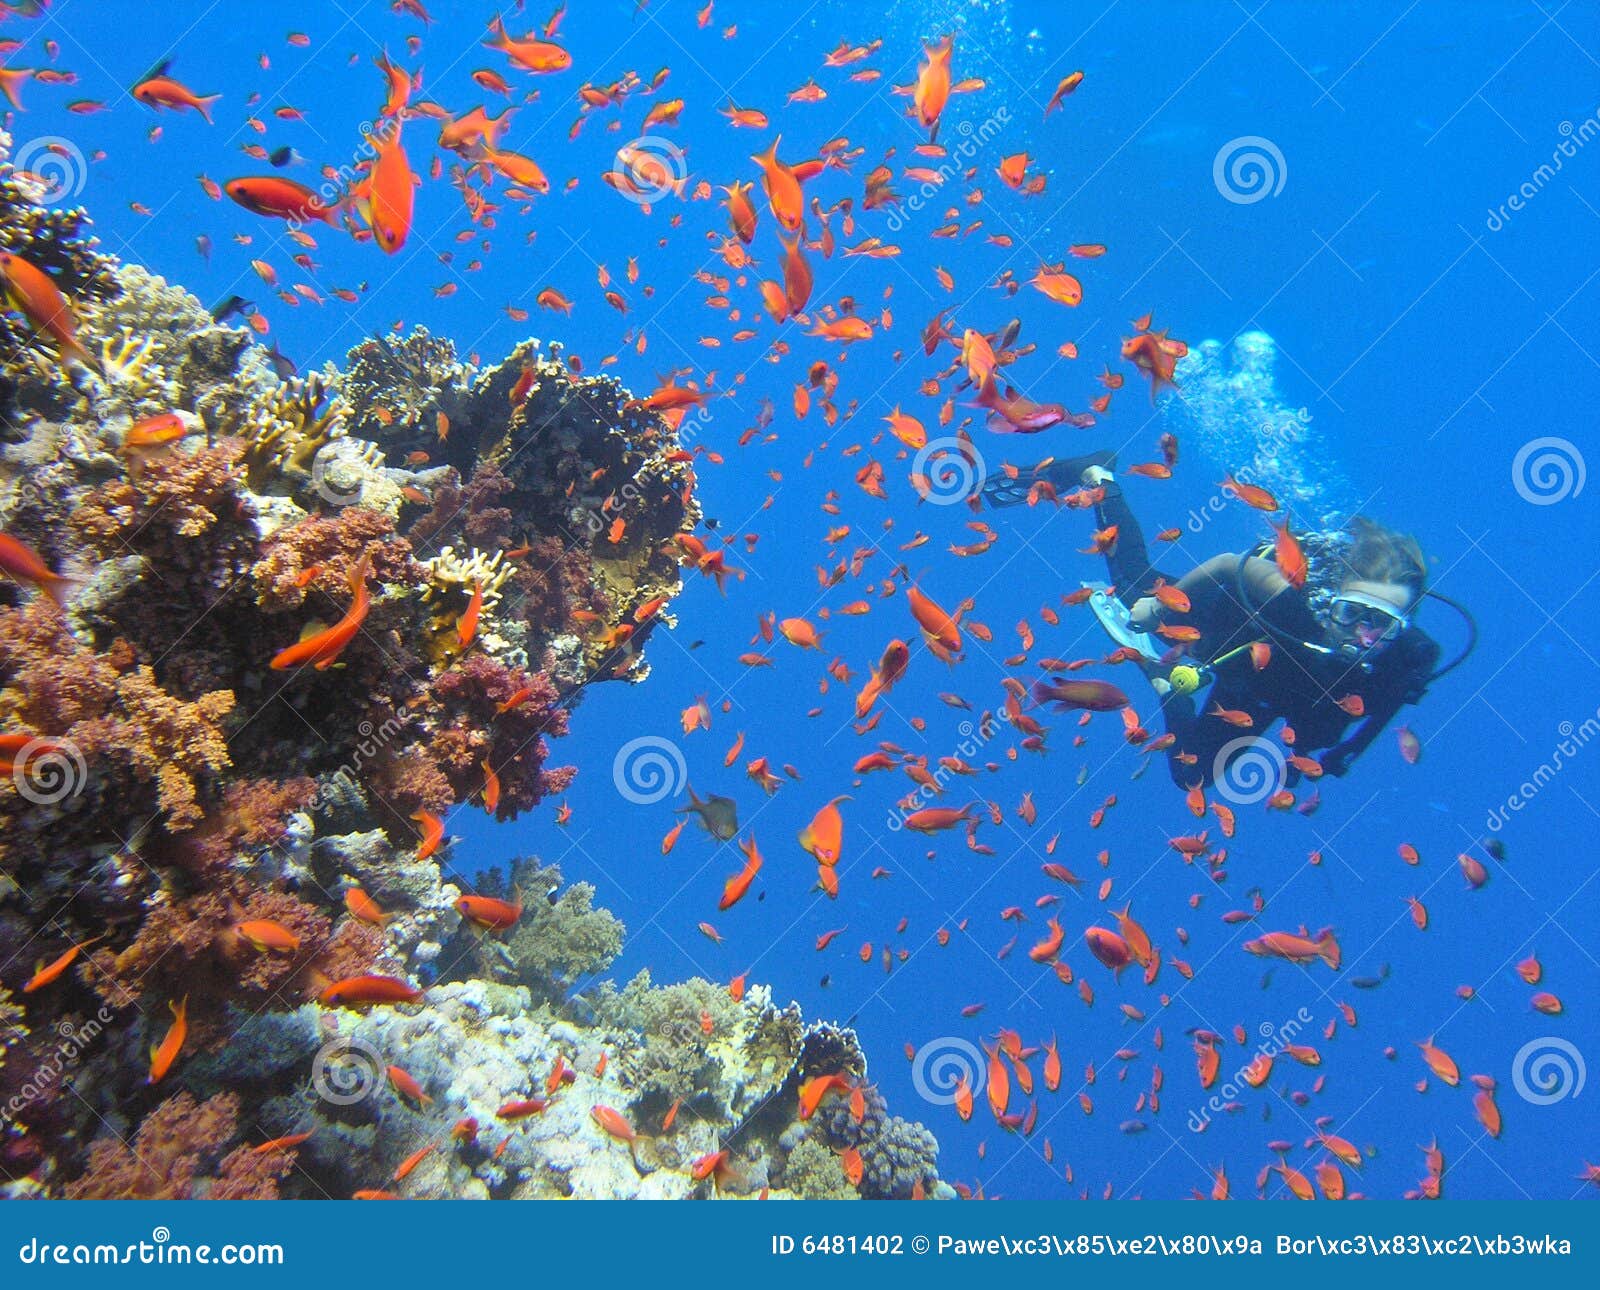 diver shallow water coral reef